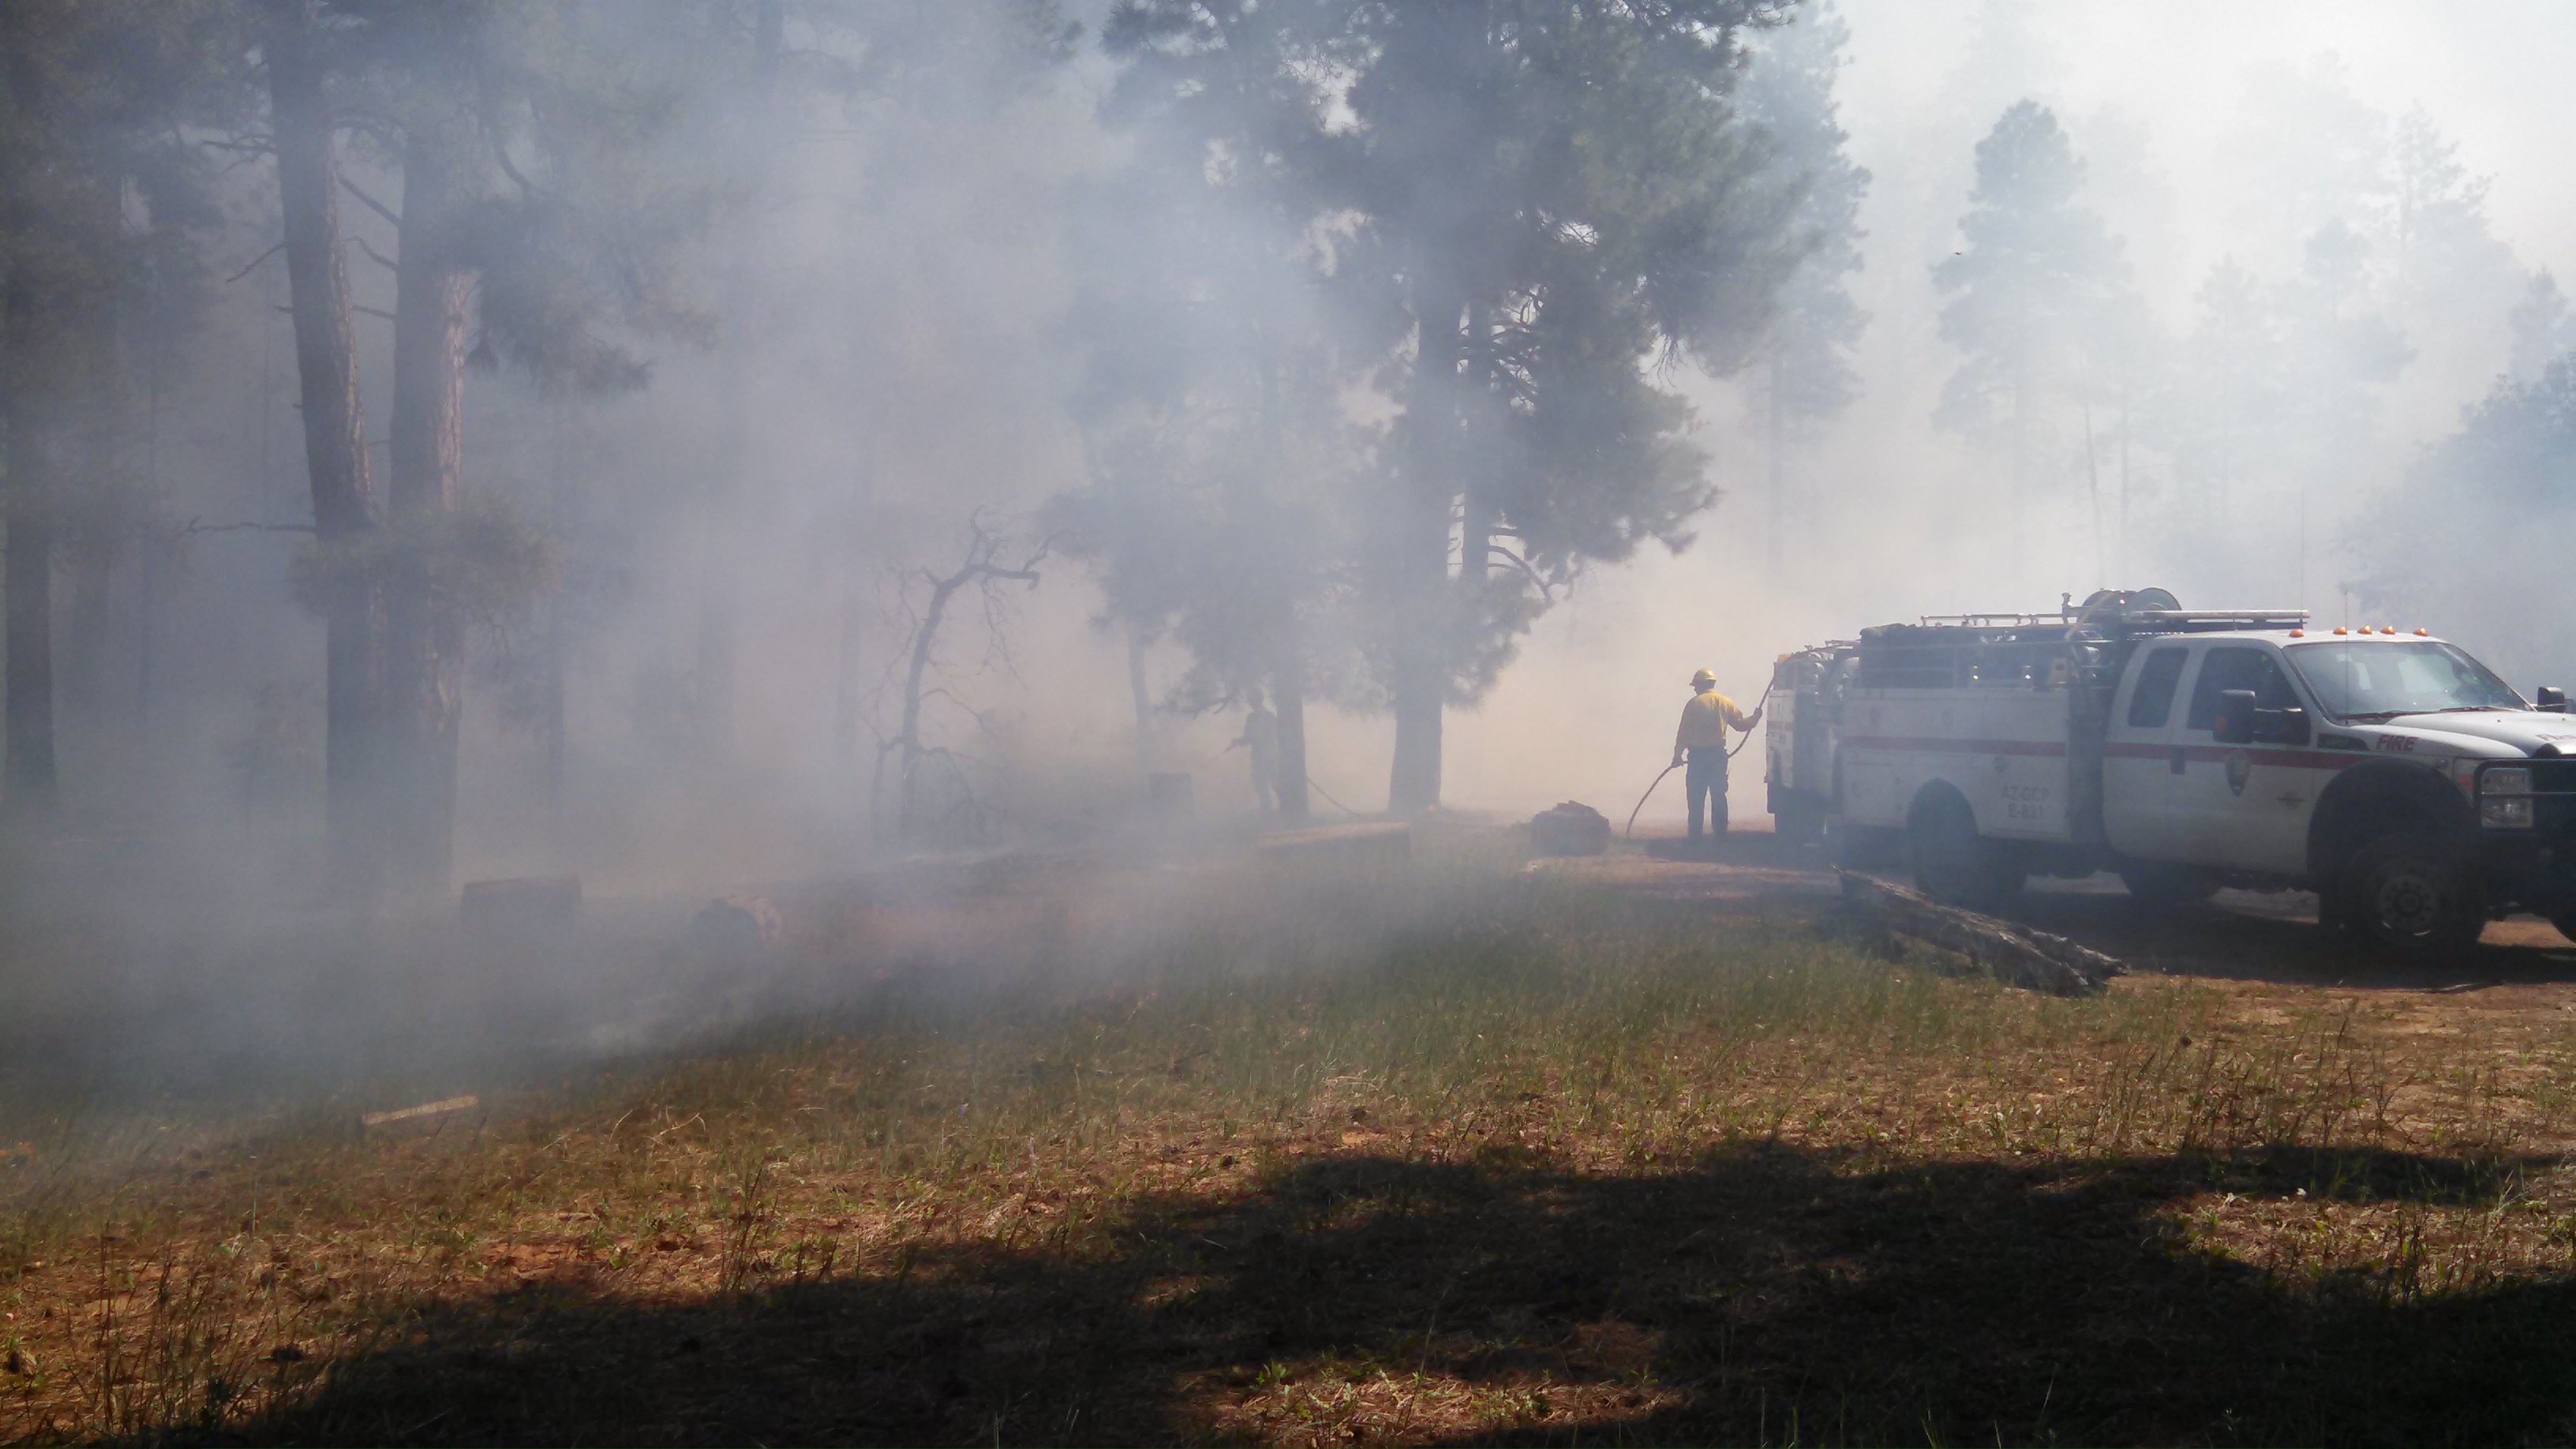 Wildland firefighters and engine near Shoshone Point